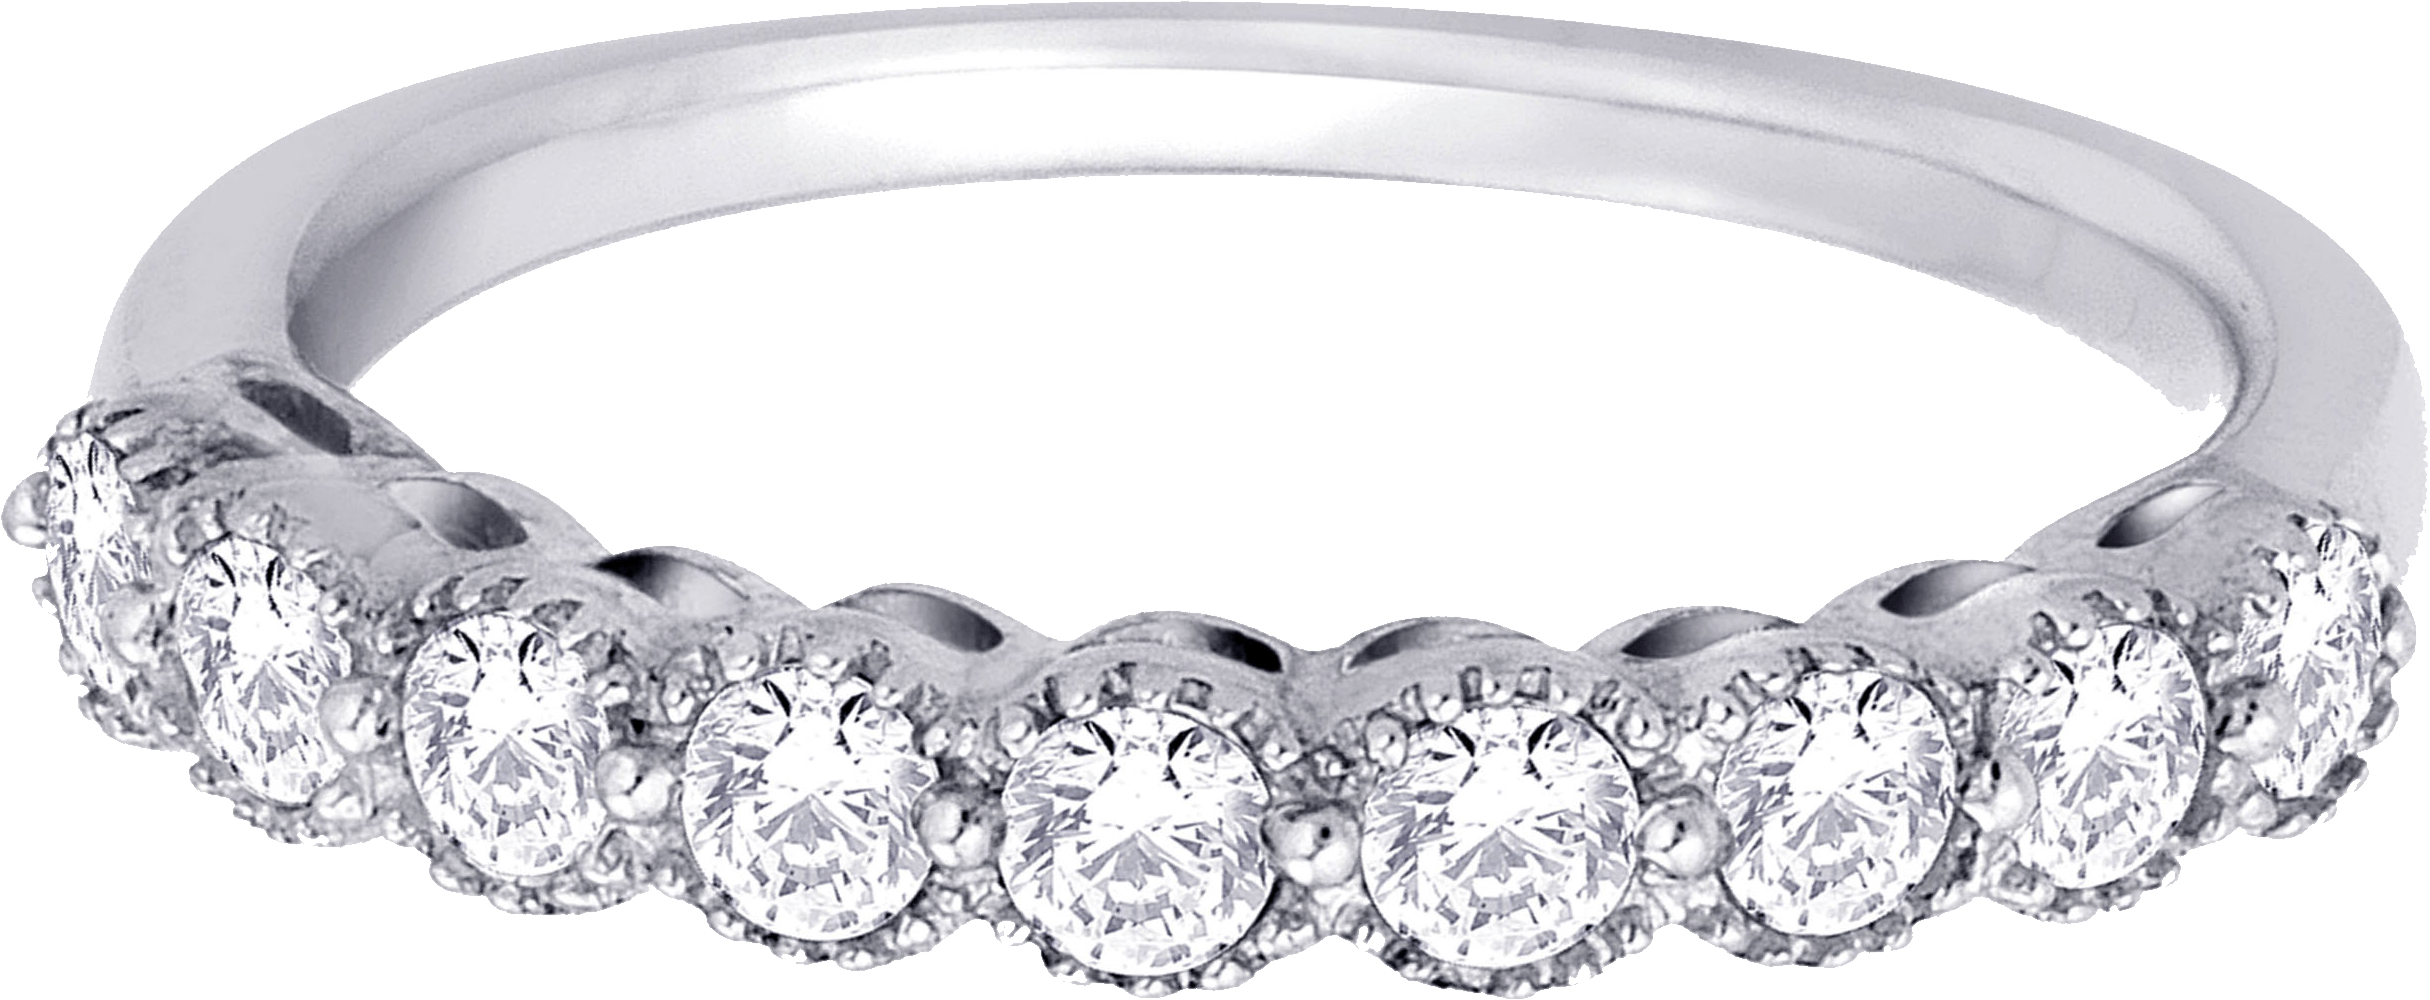 Silver Ring With Diamonds Png PNG Image